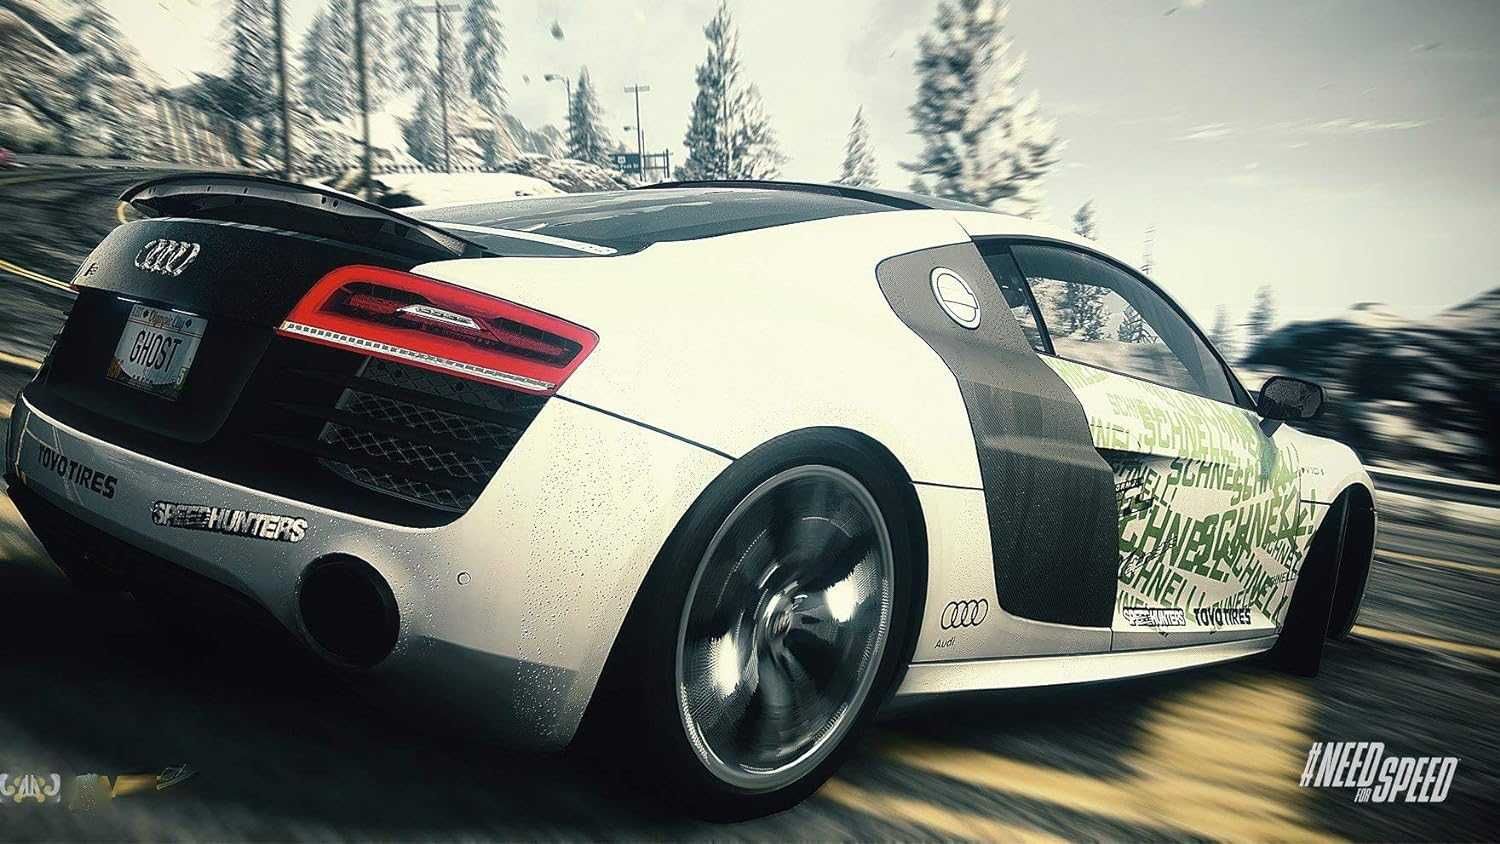 Jogos de carros   Need for speed  rivals, Need for speed, Bugatti wallpapers